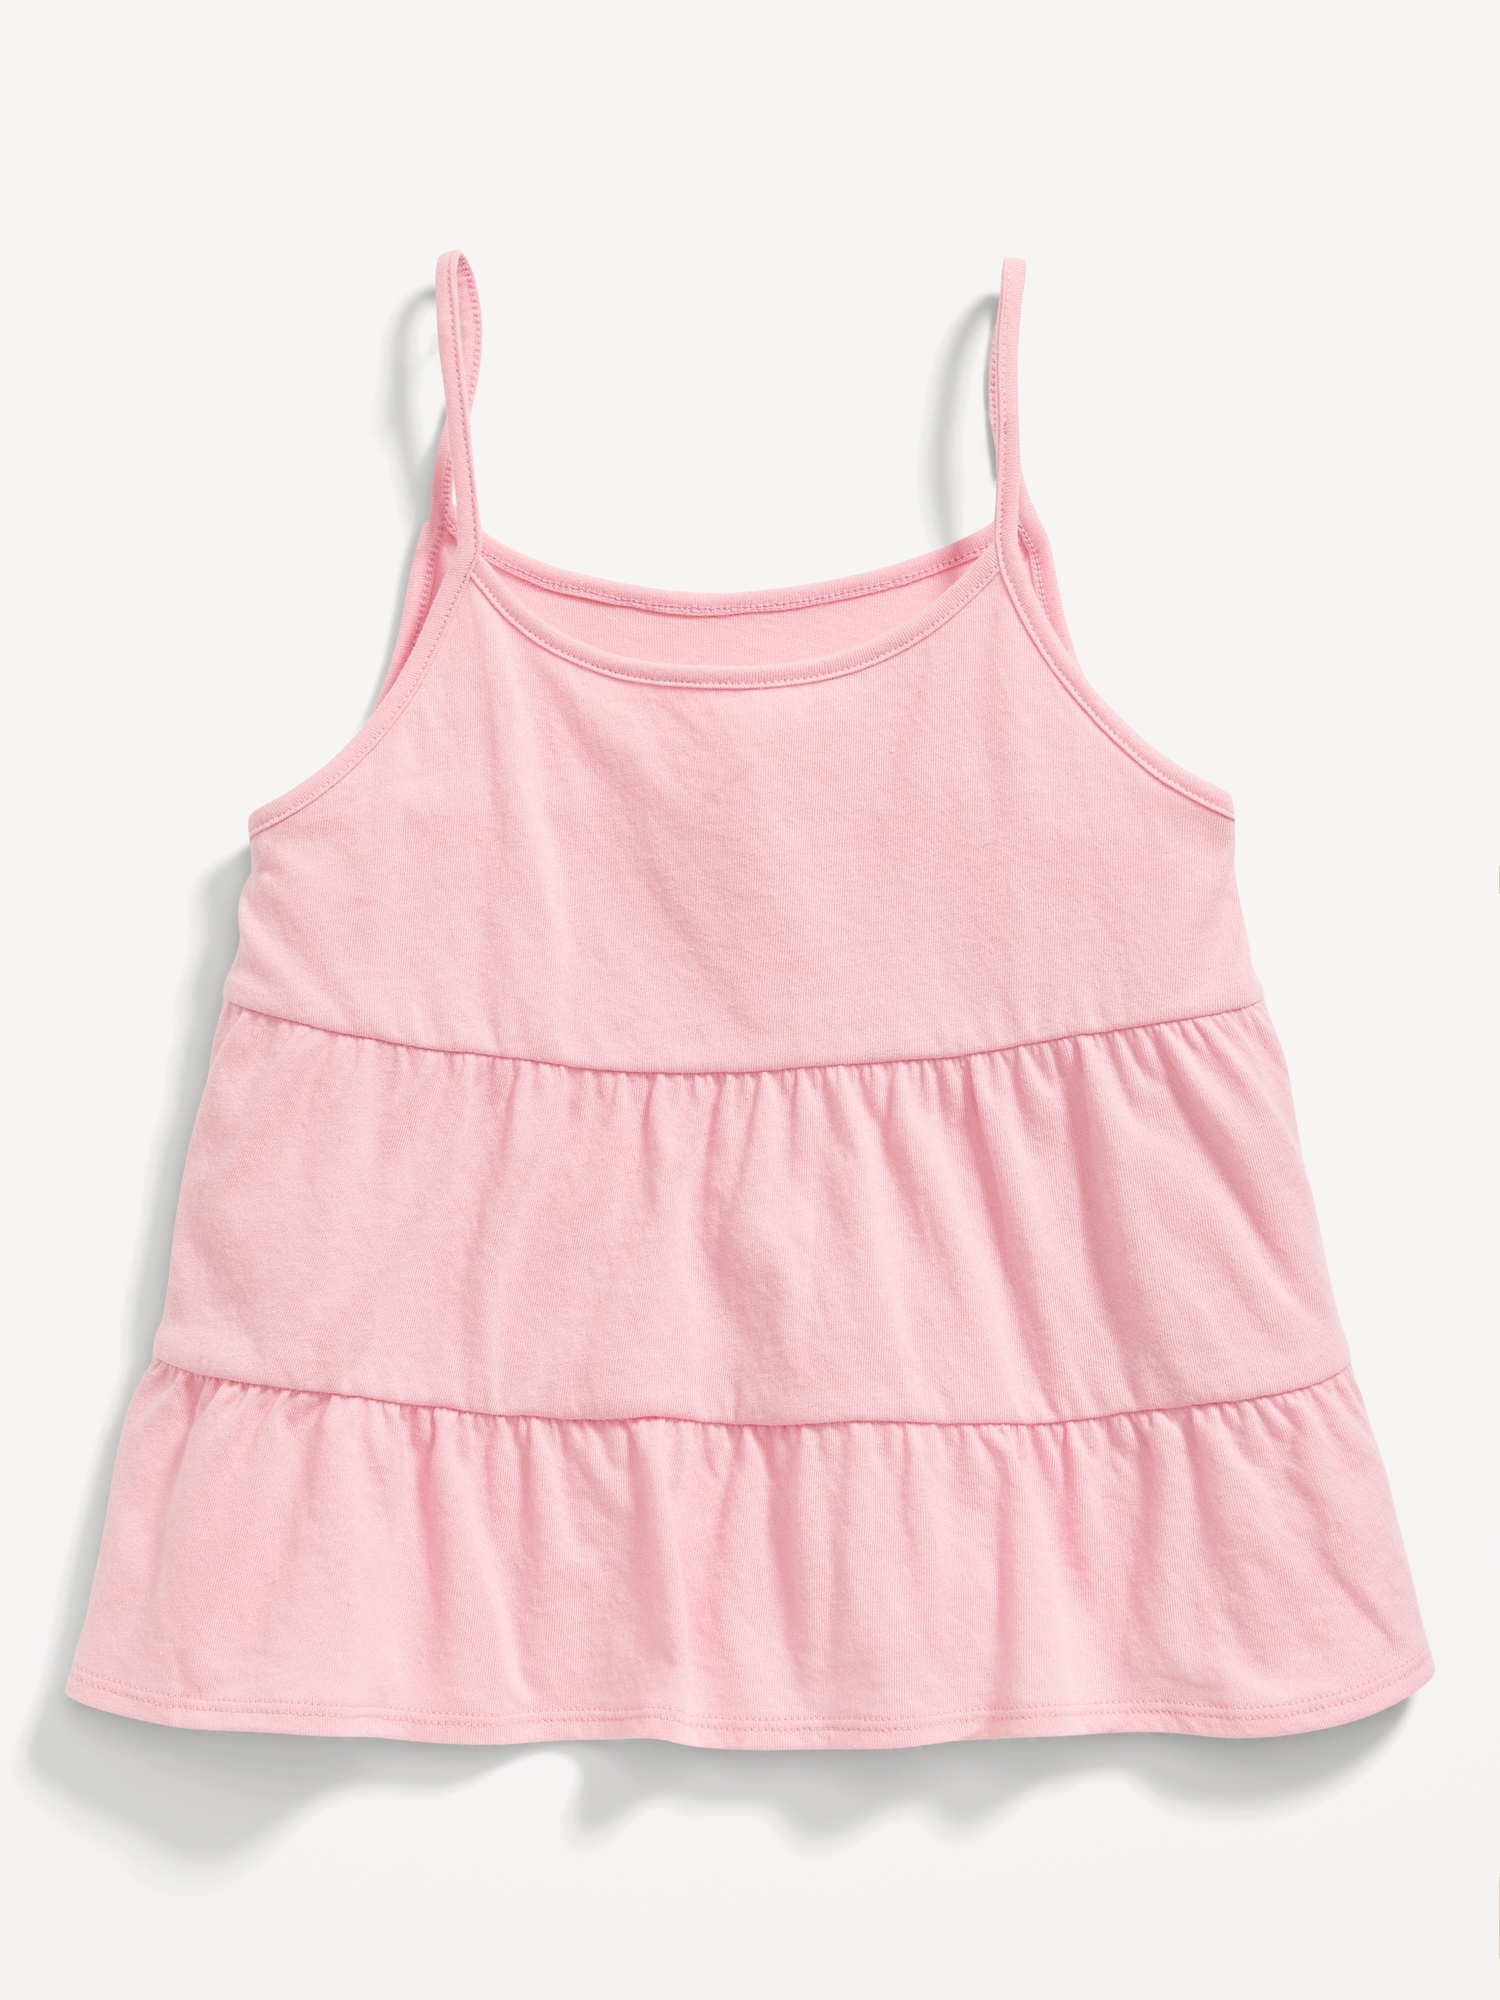 Old Navy Tiered Swing Cami Top for Girls pink. 1